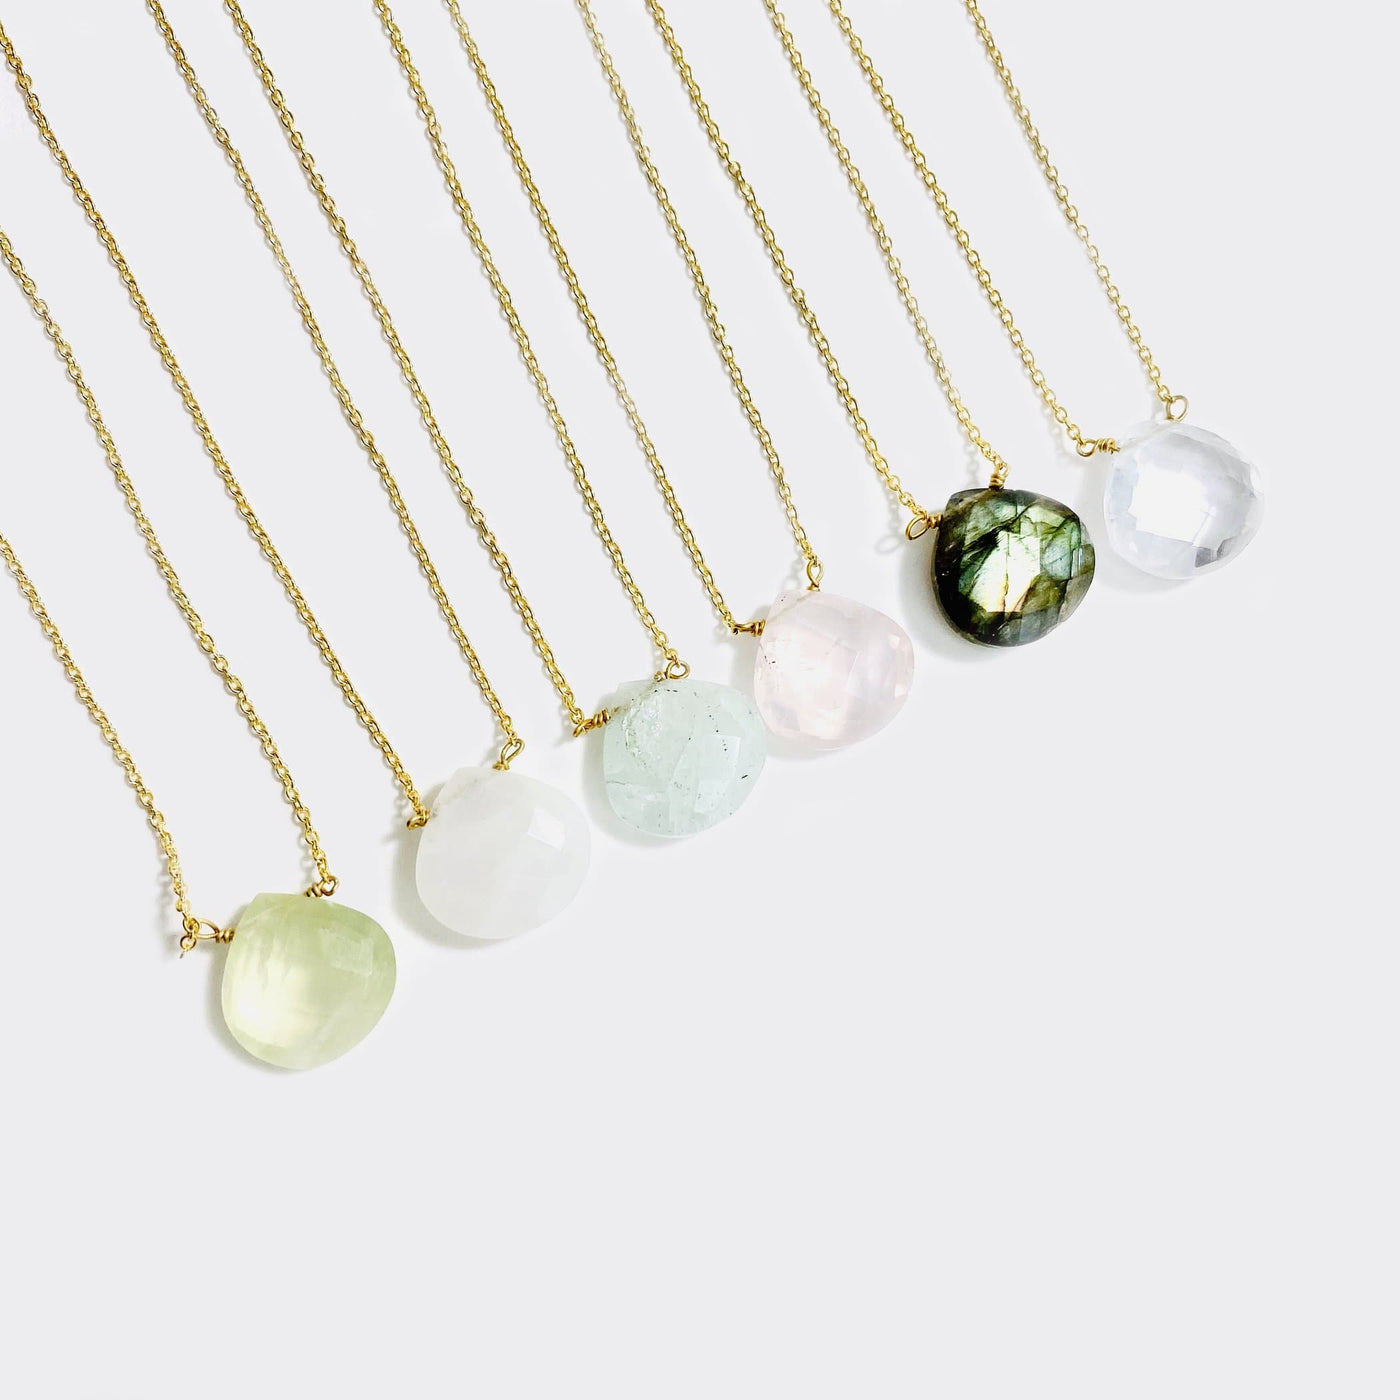 Top view of 6 gemstone drop necklace in gold